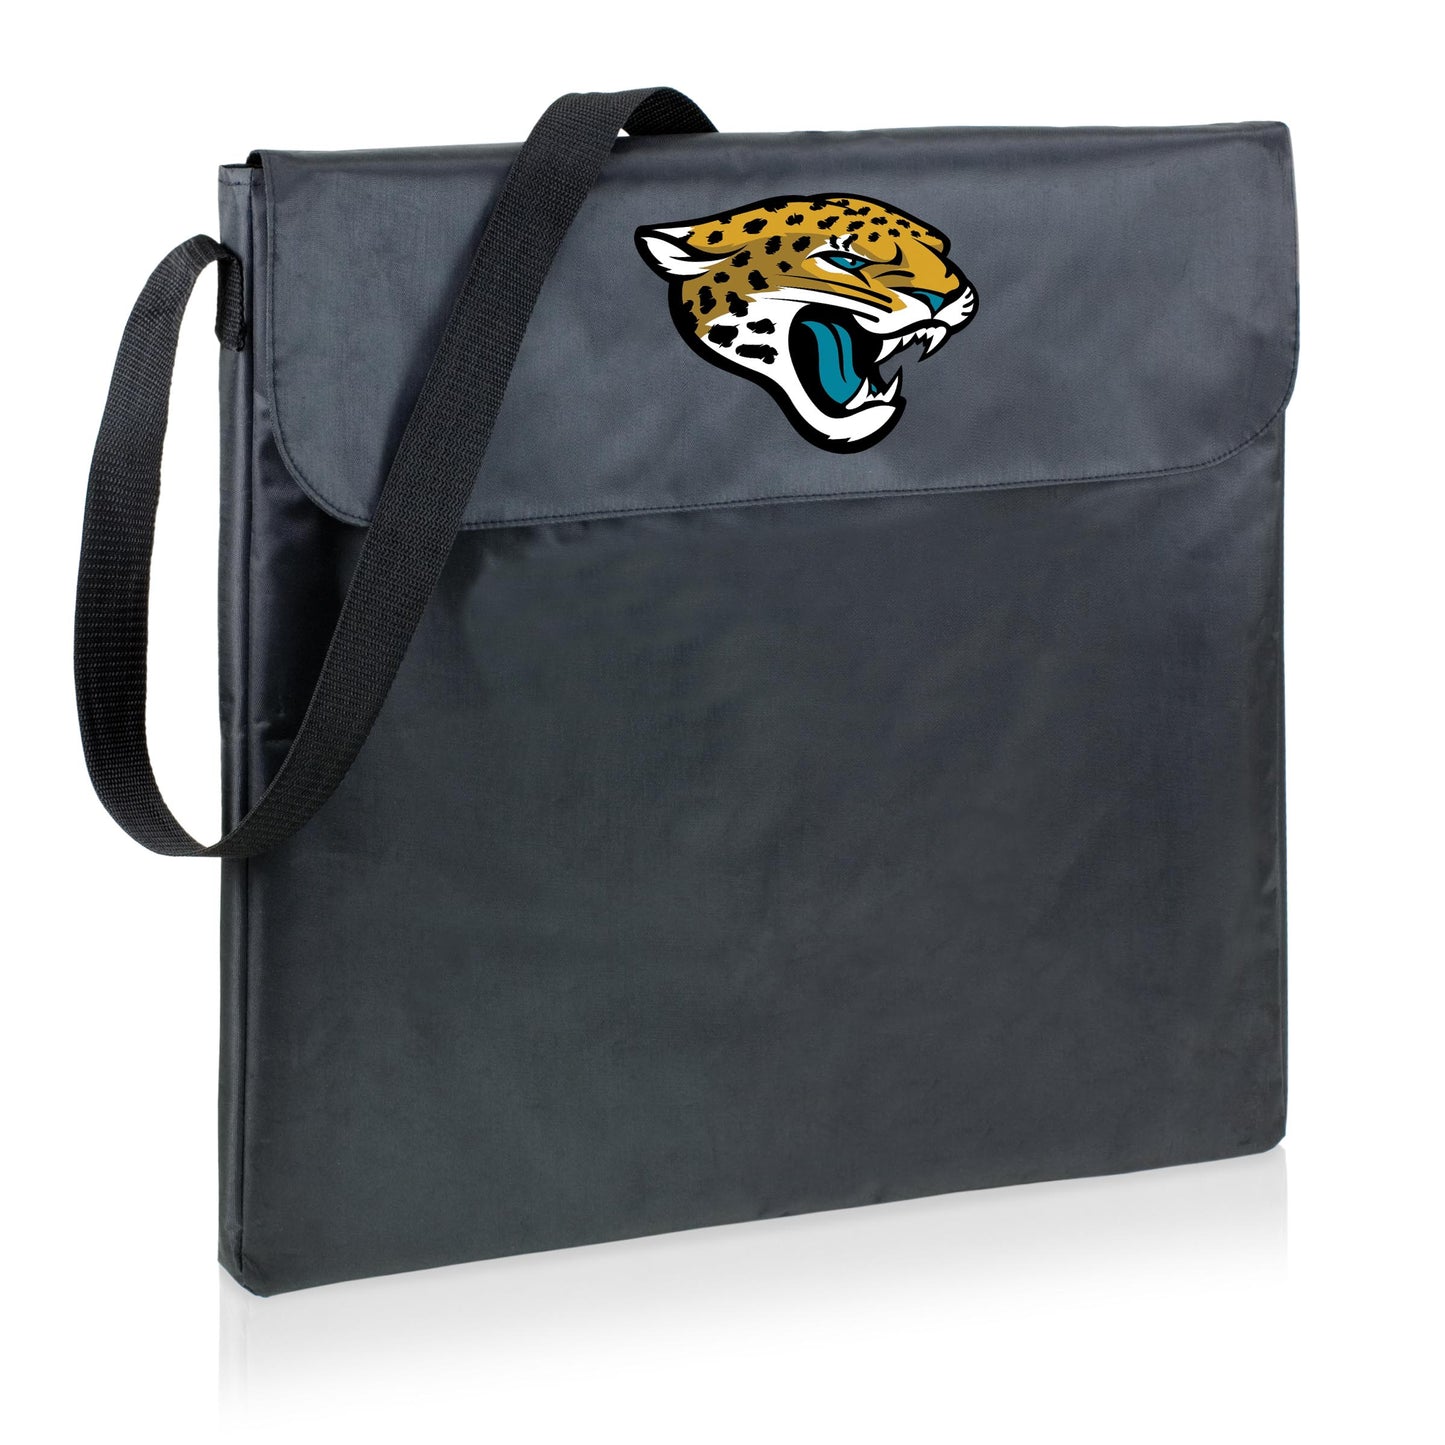 Jacksonville Jaguars - X-Grill Portable Charcoal BBQ Grill